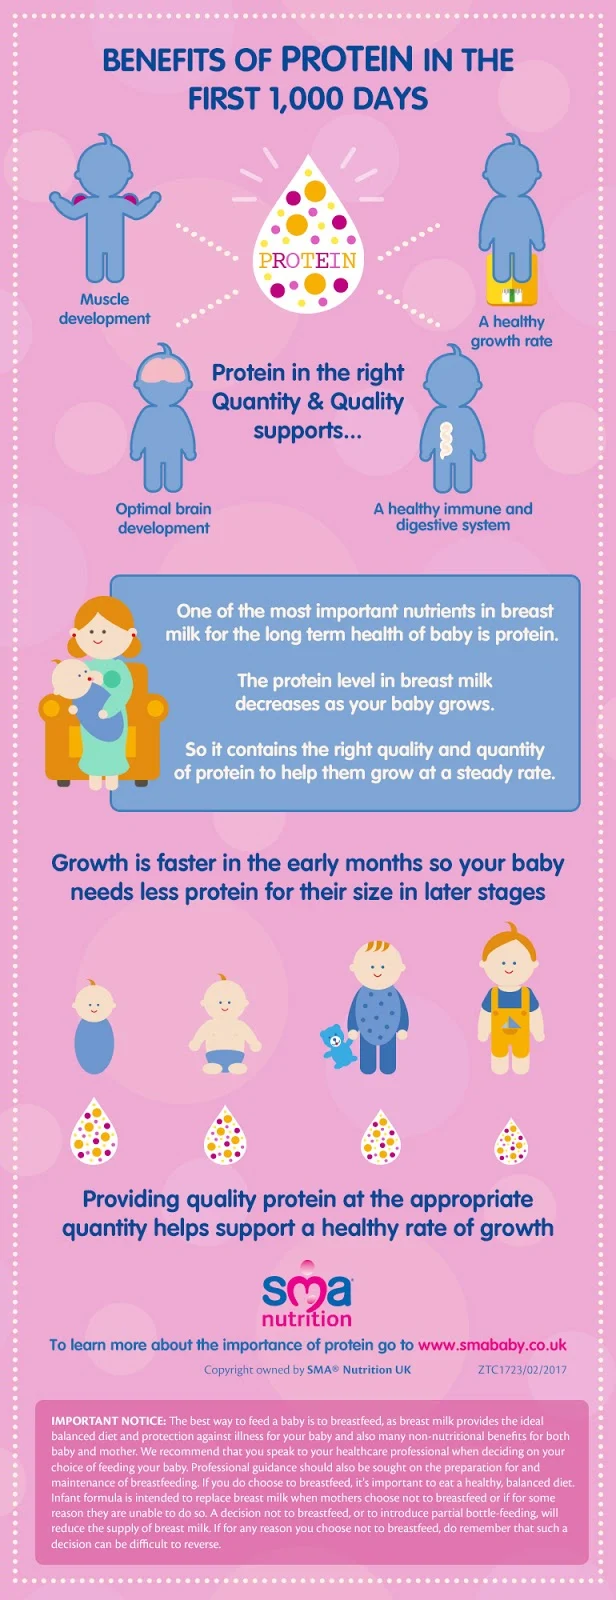 Infographic on the importance of protein in the first 1000 days from SMA Nutrition